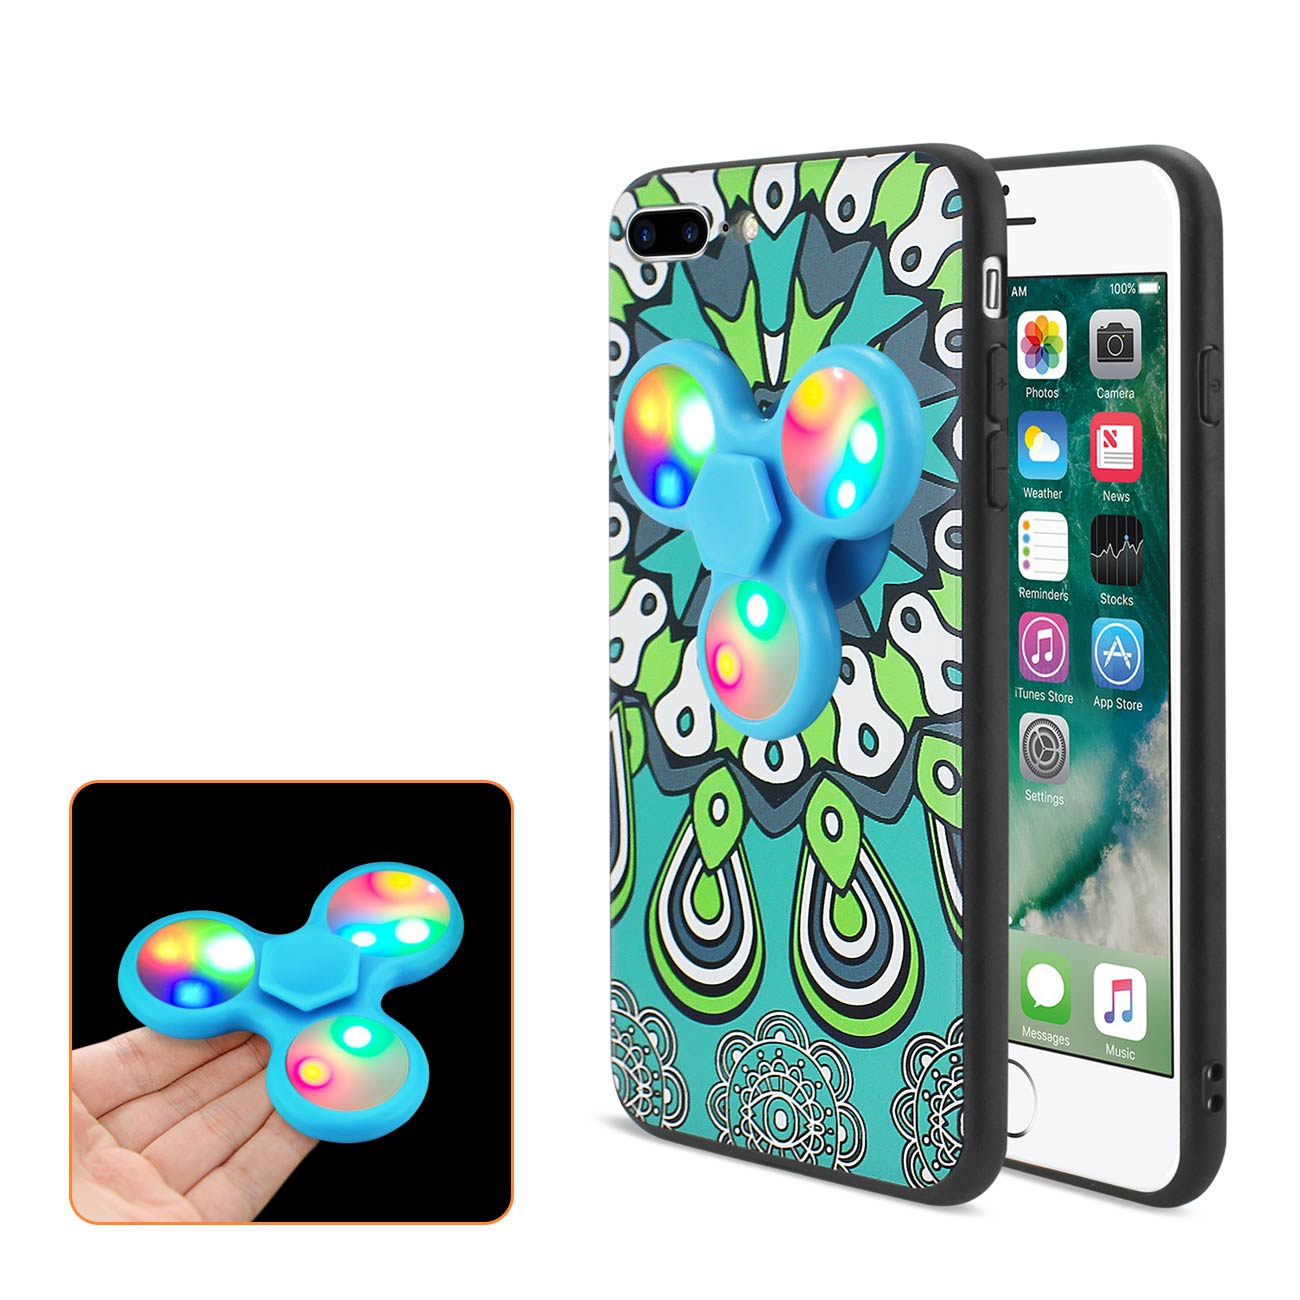 Design The Inspiration Of Peacock iPhone 7 Plus Case With Led Fidget Spinner In Turquoise